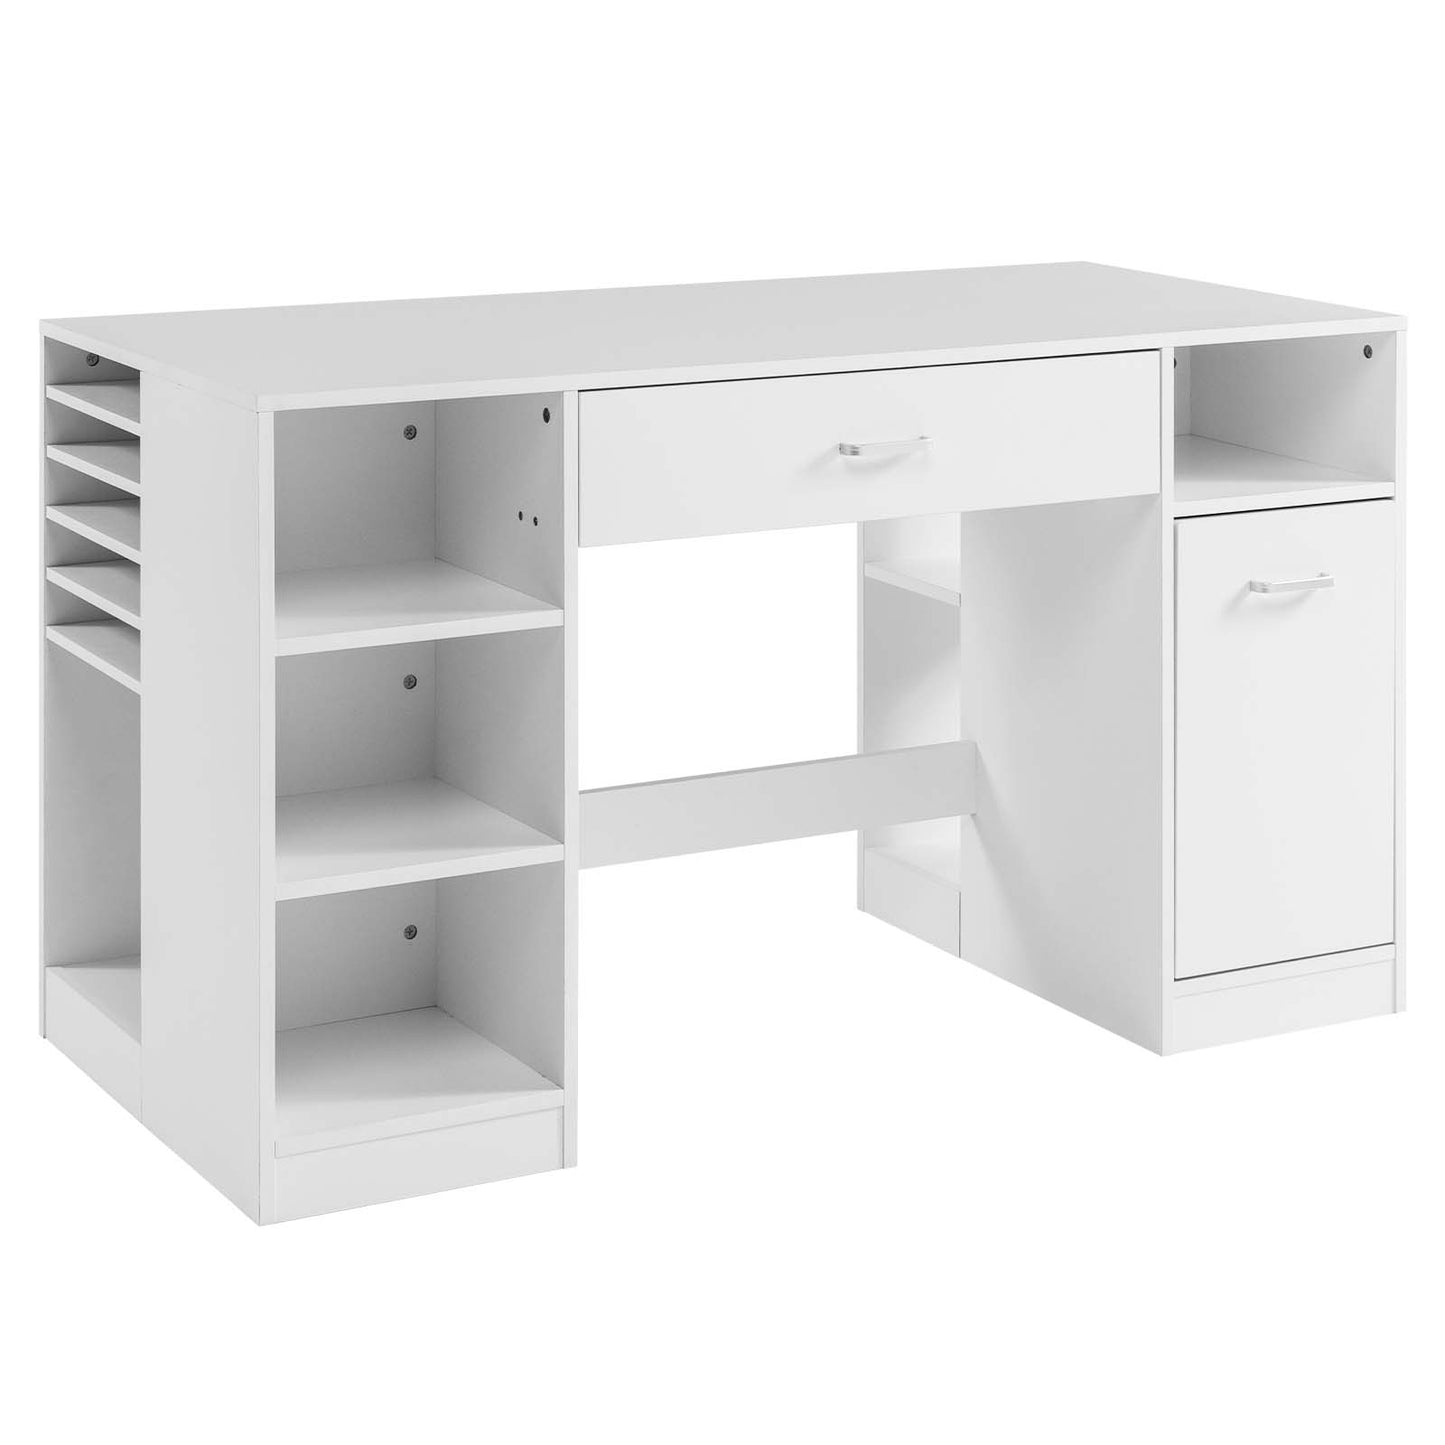 Large Sewing Craft Table with Drawers and Open Storage Shelves-White